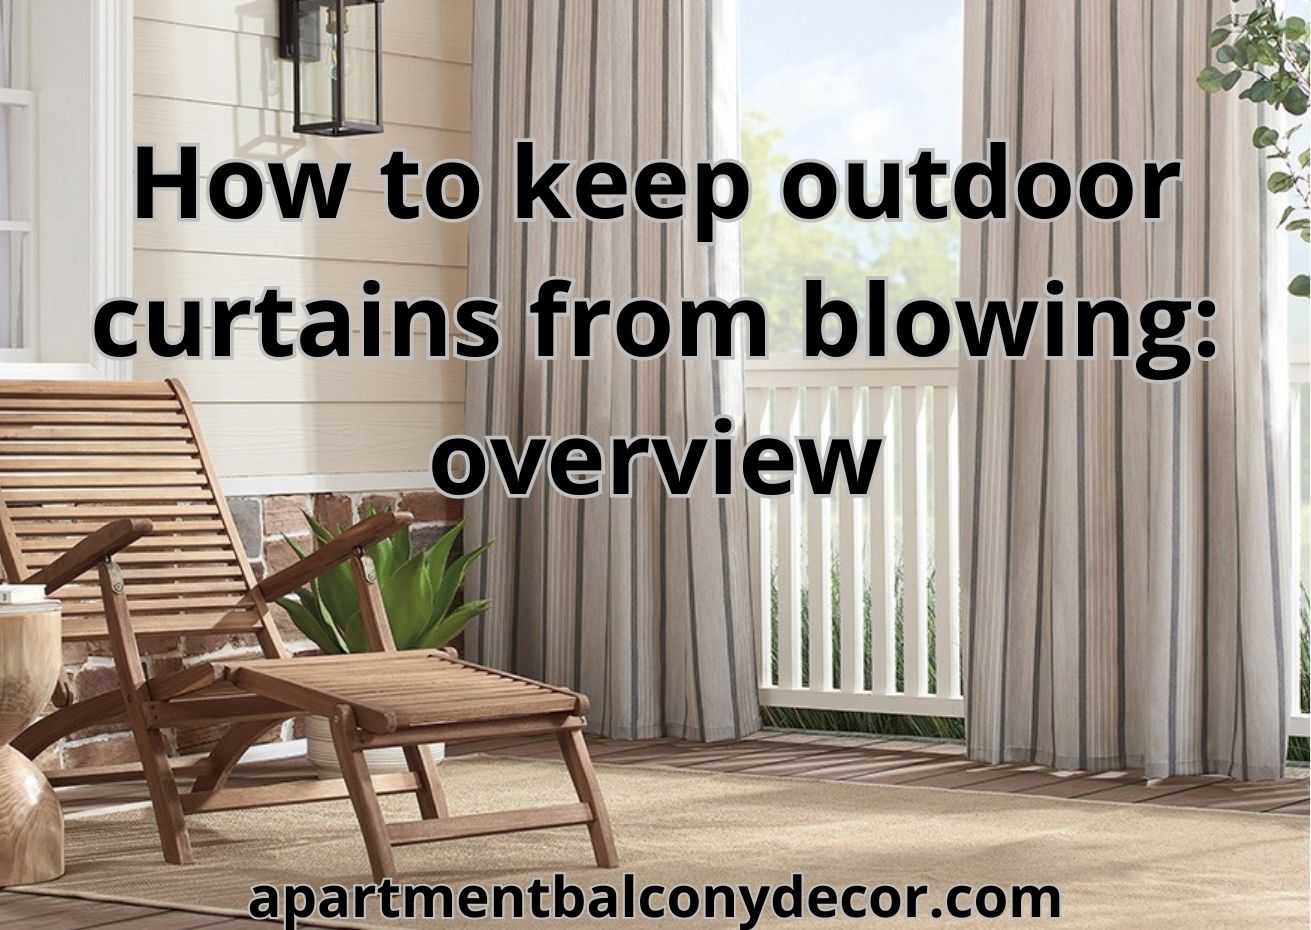 How to keep outdoor curtains from blowing? The best overview